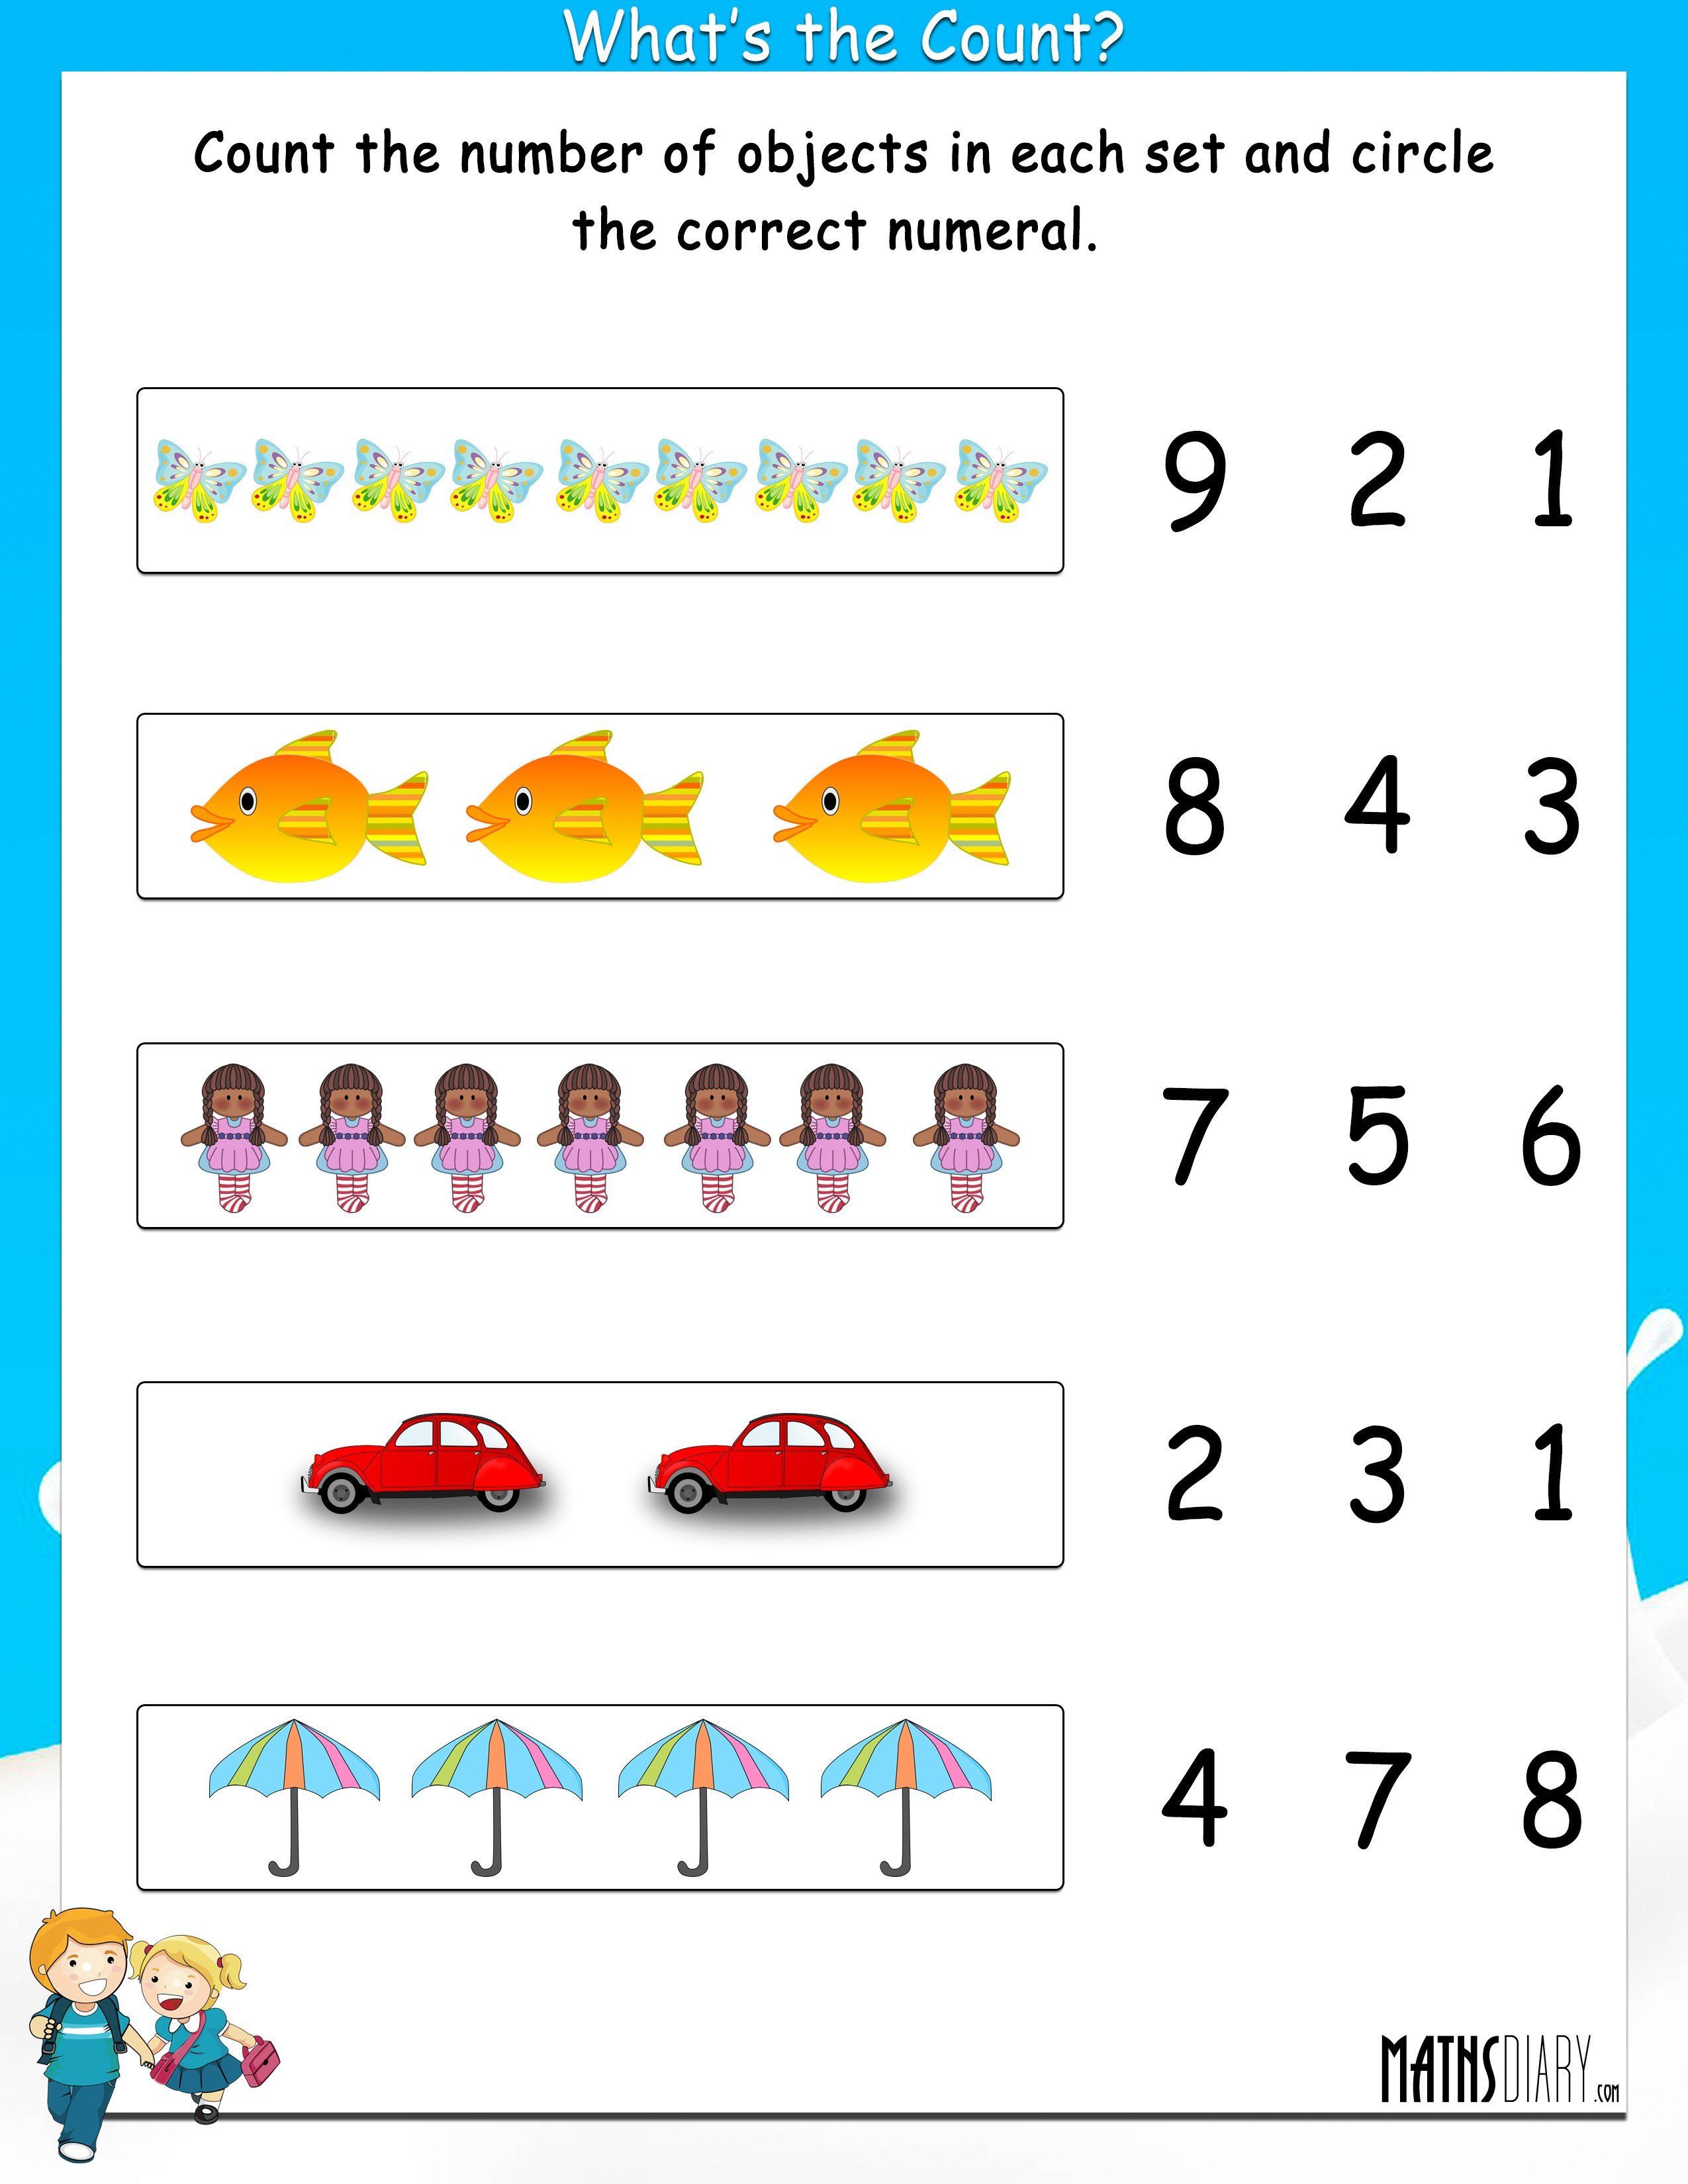 counting-grade-1-math-worksheets-page-3